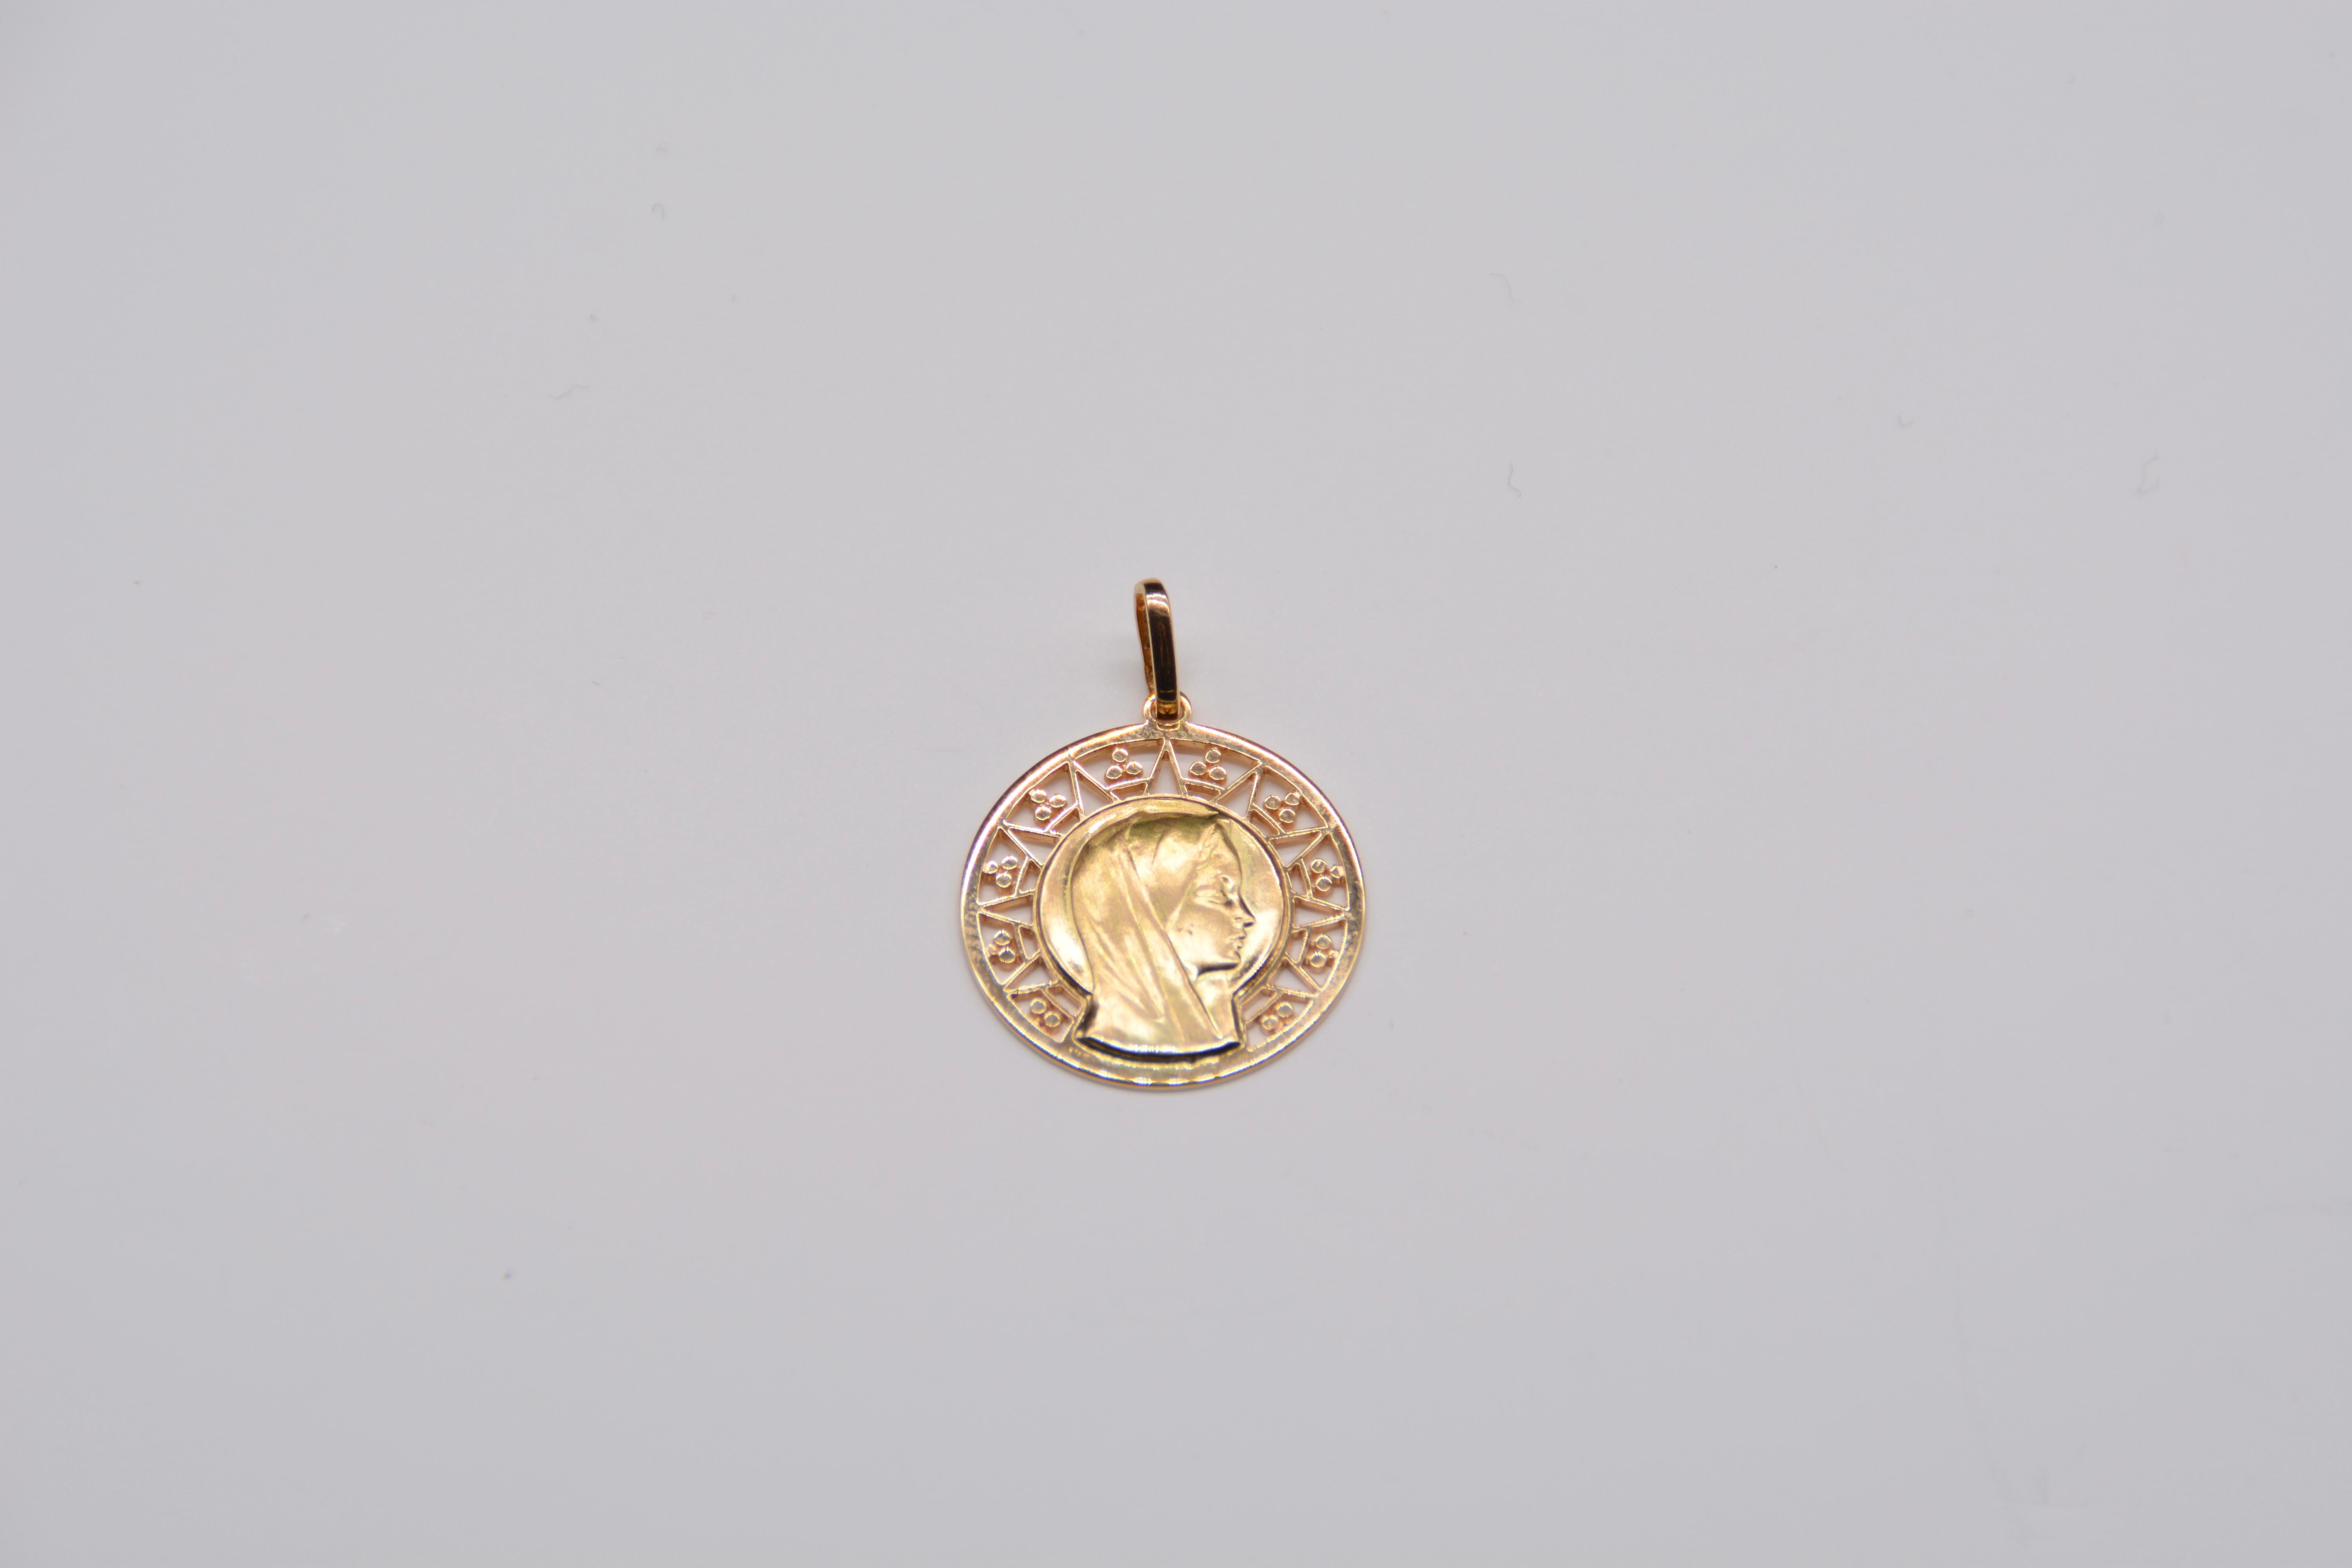 Medal Virgin French Round Openwork Gold Yellow

This beautiful openwork Virgin medal in 18 carat yellow gold is a superior piece of jewellery that draws the eye with its beauty and simplicity. The round medal features a profile image of the Virgin